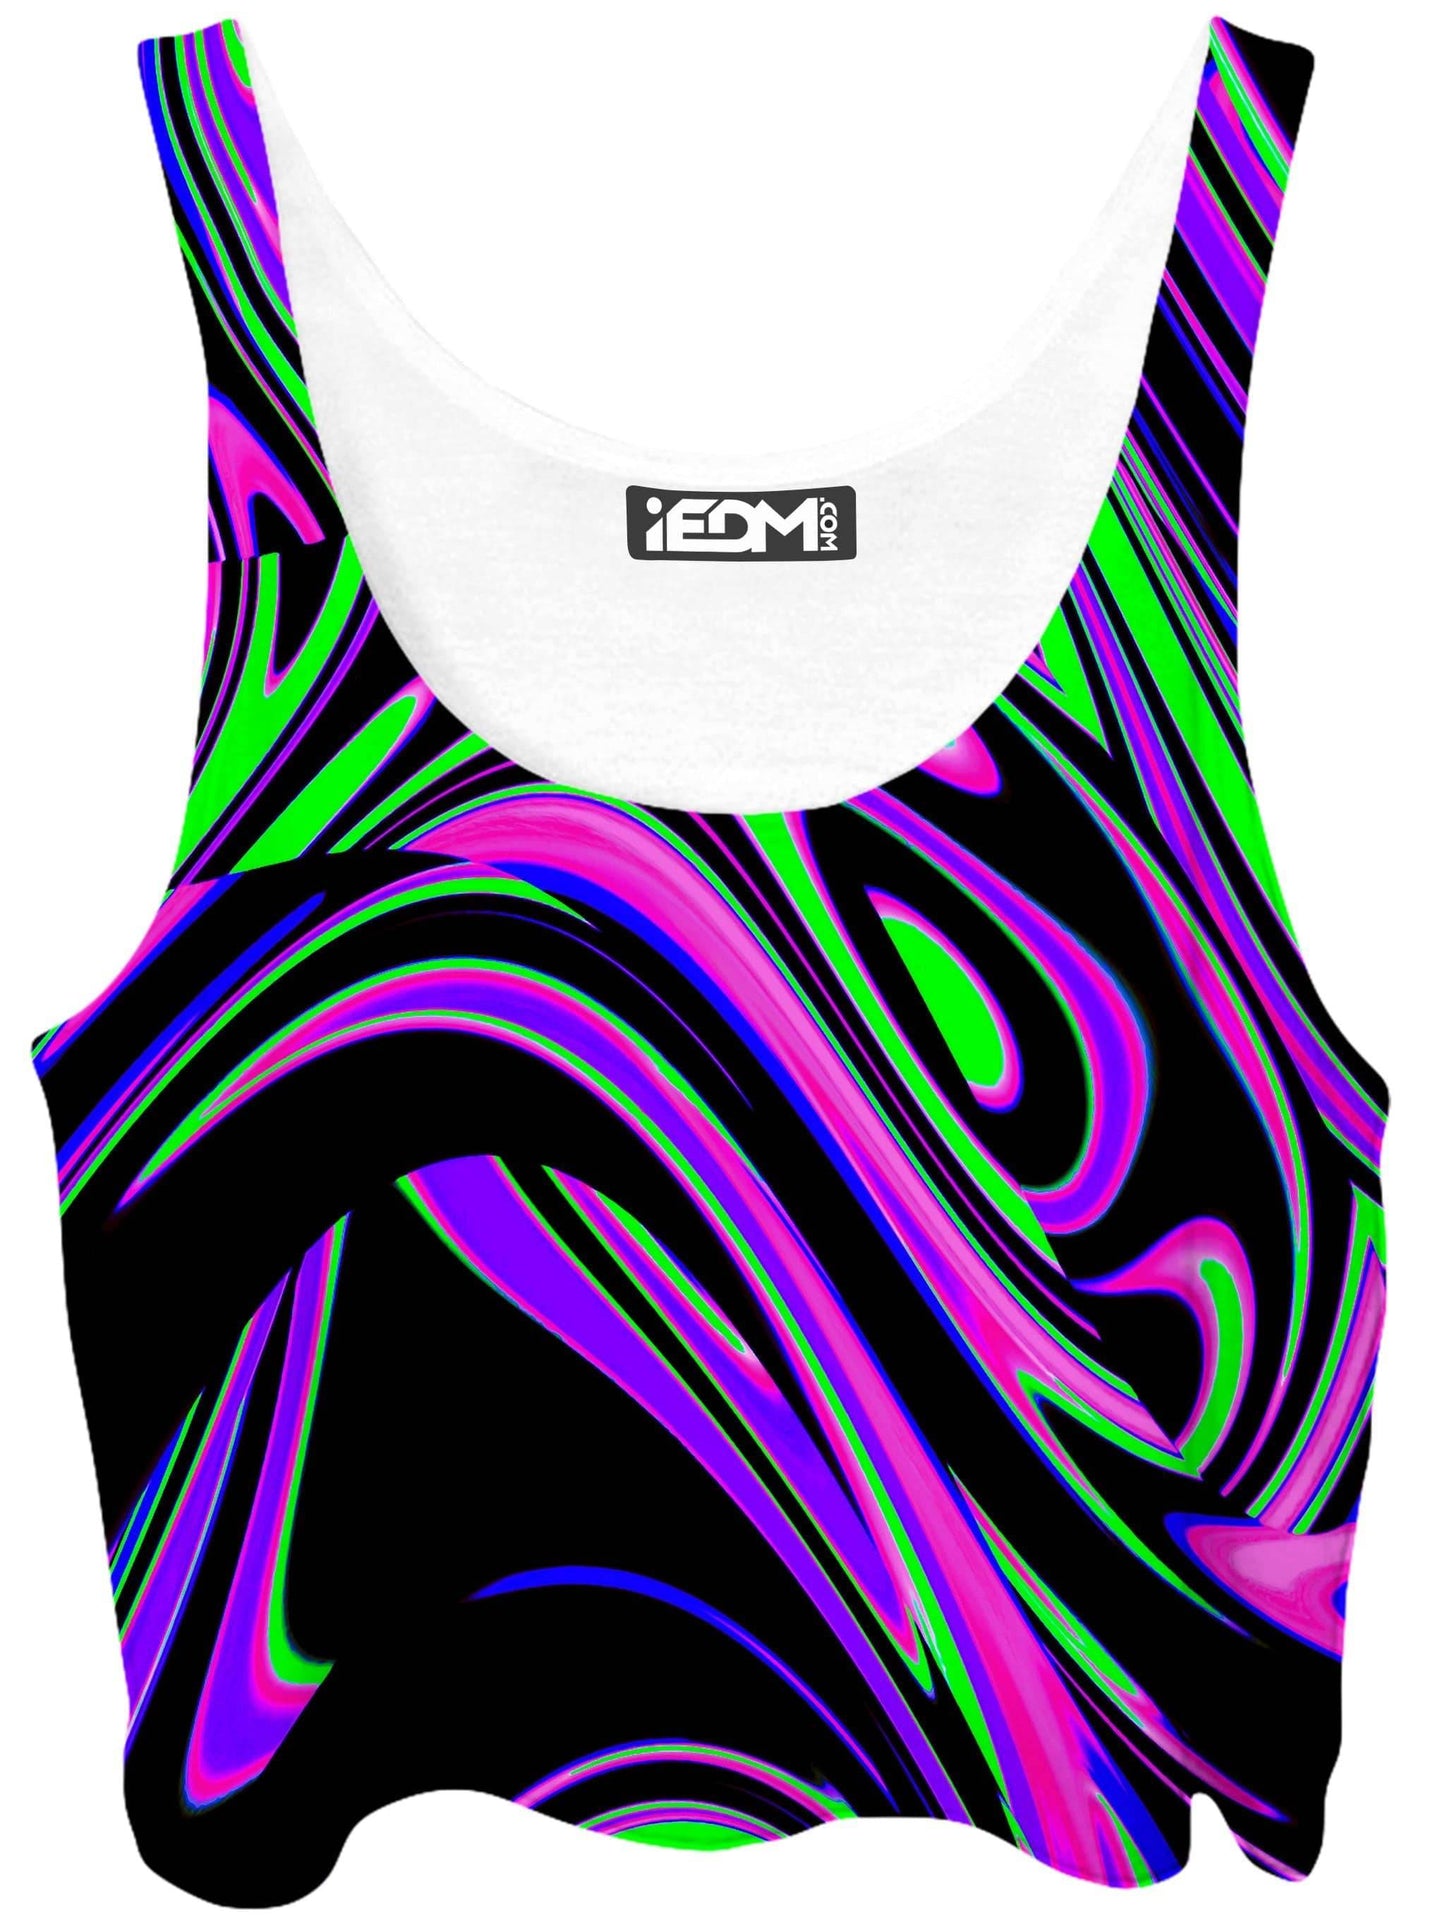 Violet and Lime Blackout Drip Crop Top, Big Tex Funkadelic, | iEDM